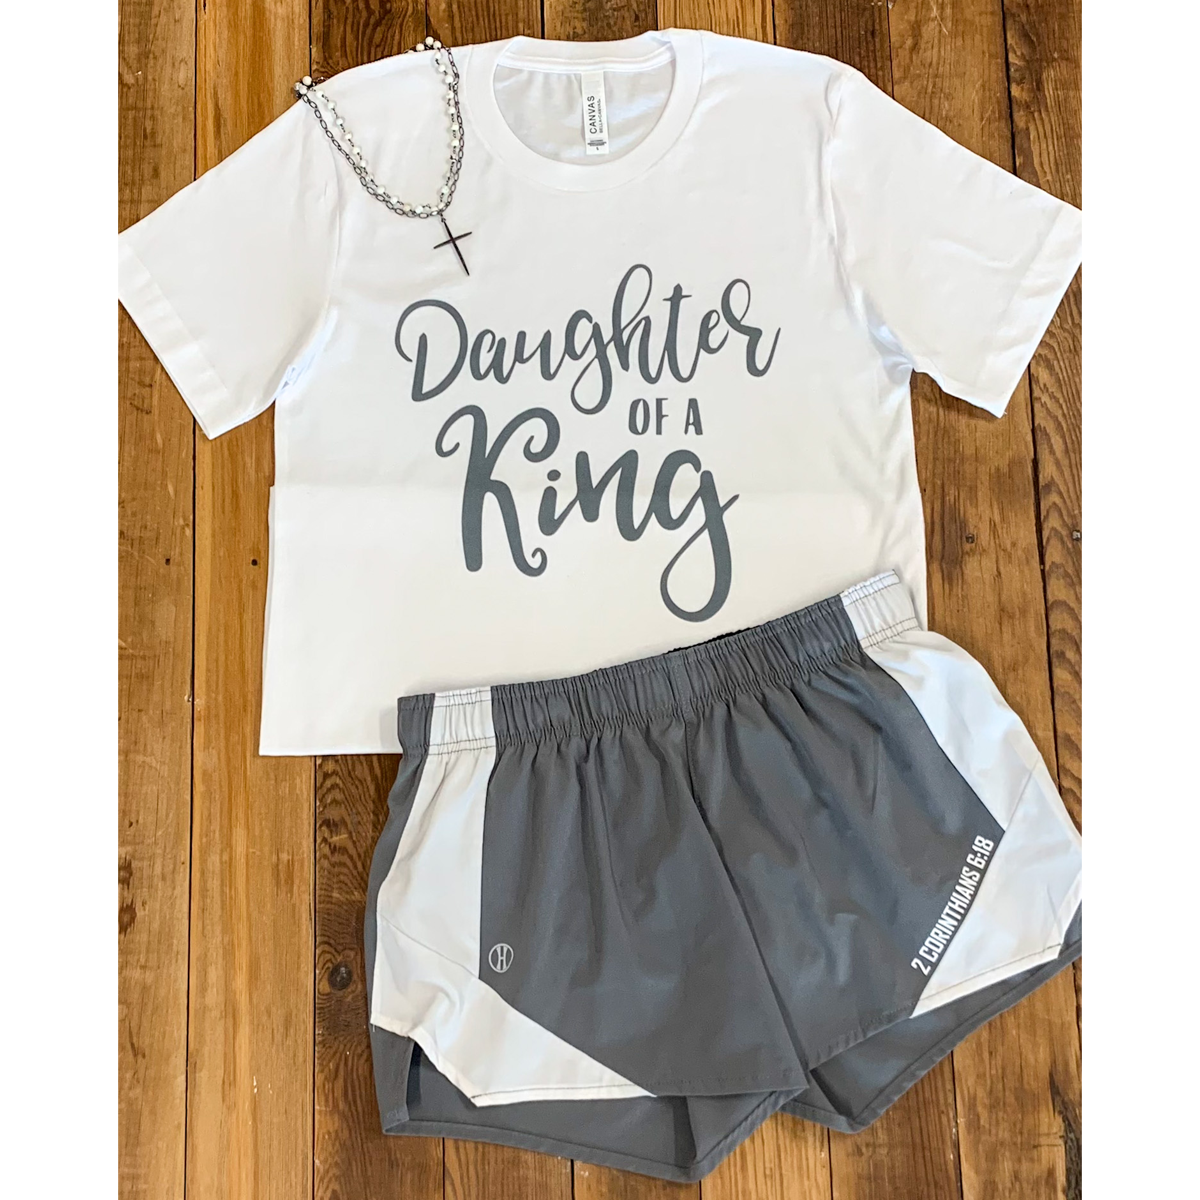 Daughter of a King Set (White Shirt/ Grey and White Olympus Shorts) - Southern Grace Creations